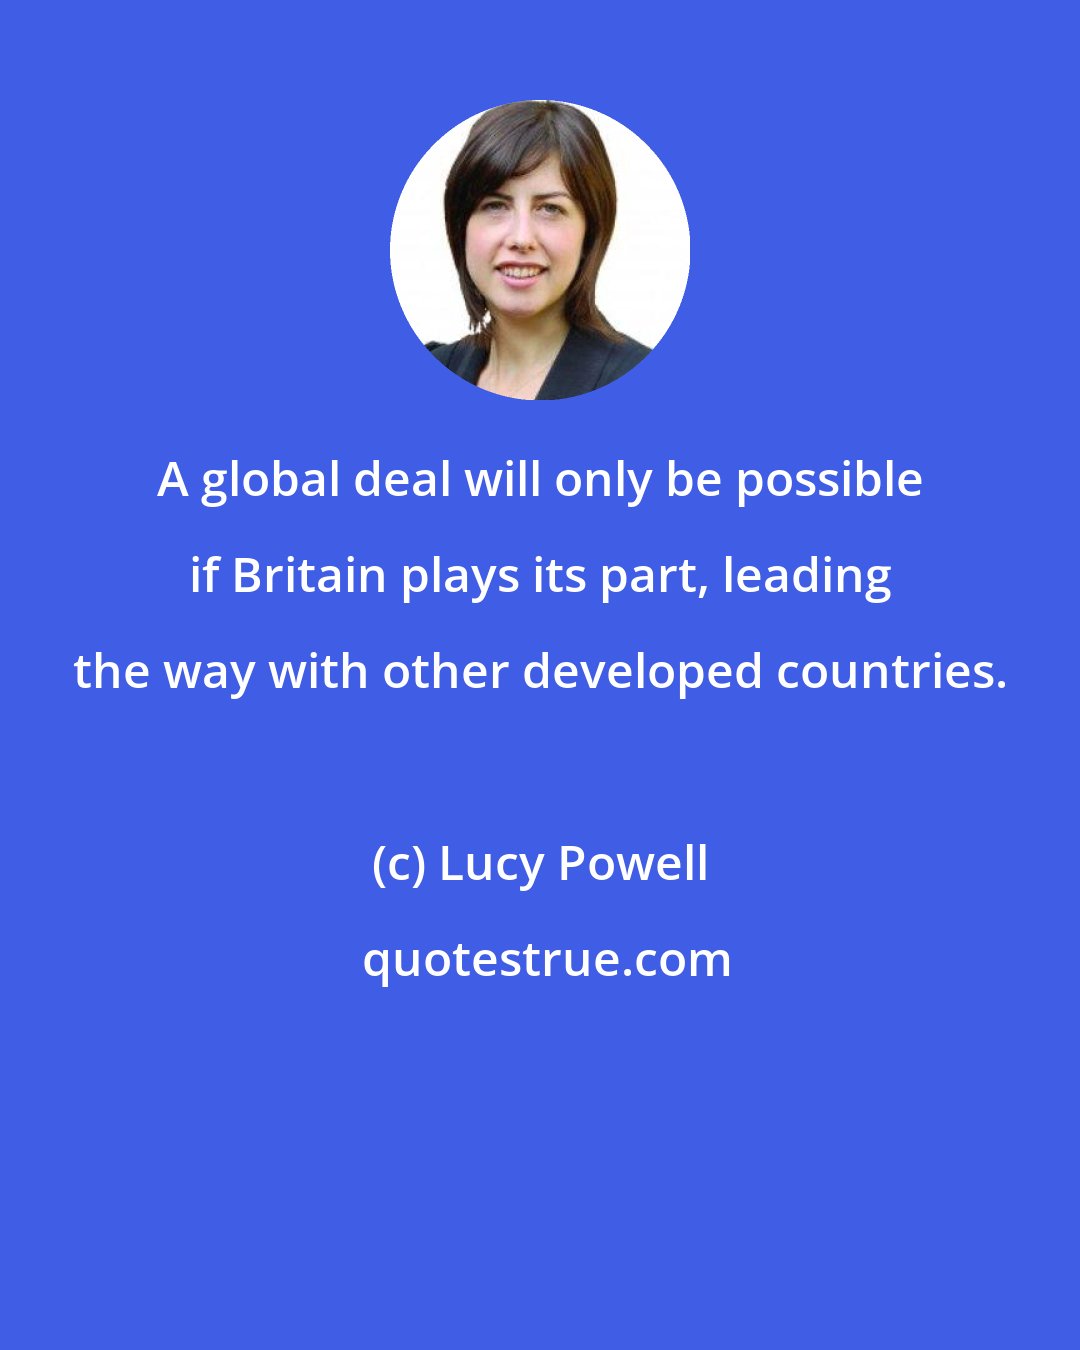 Lucy Powell: A global deal will only be possible if Britain plays its part, leading the way with other developed countries.